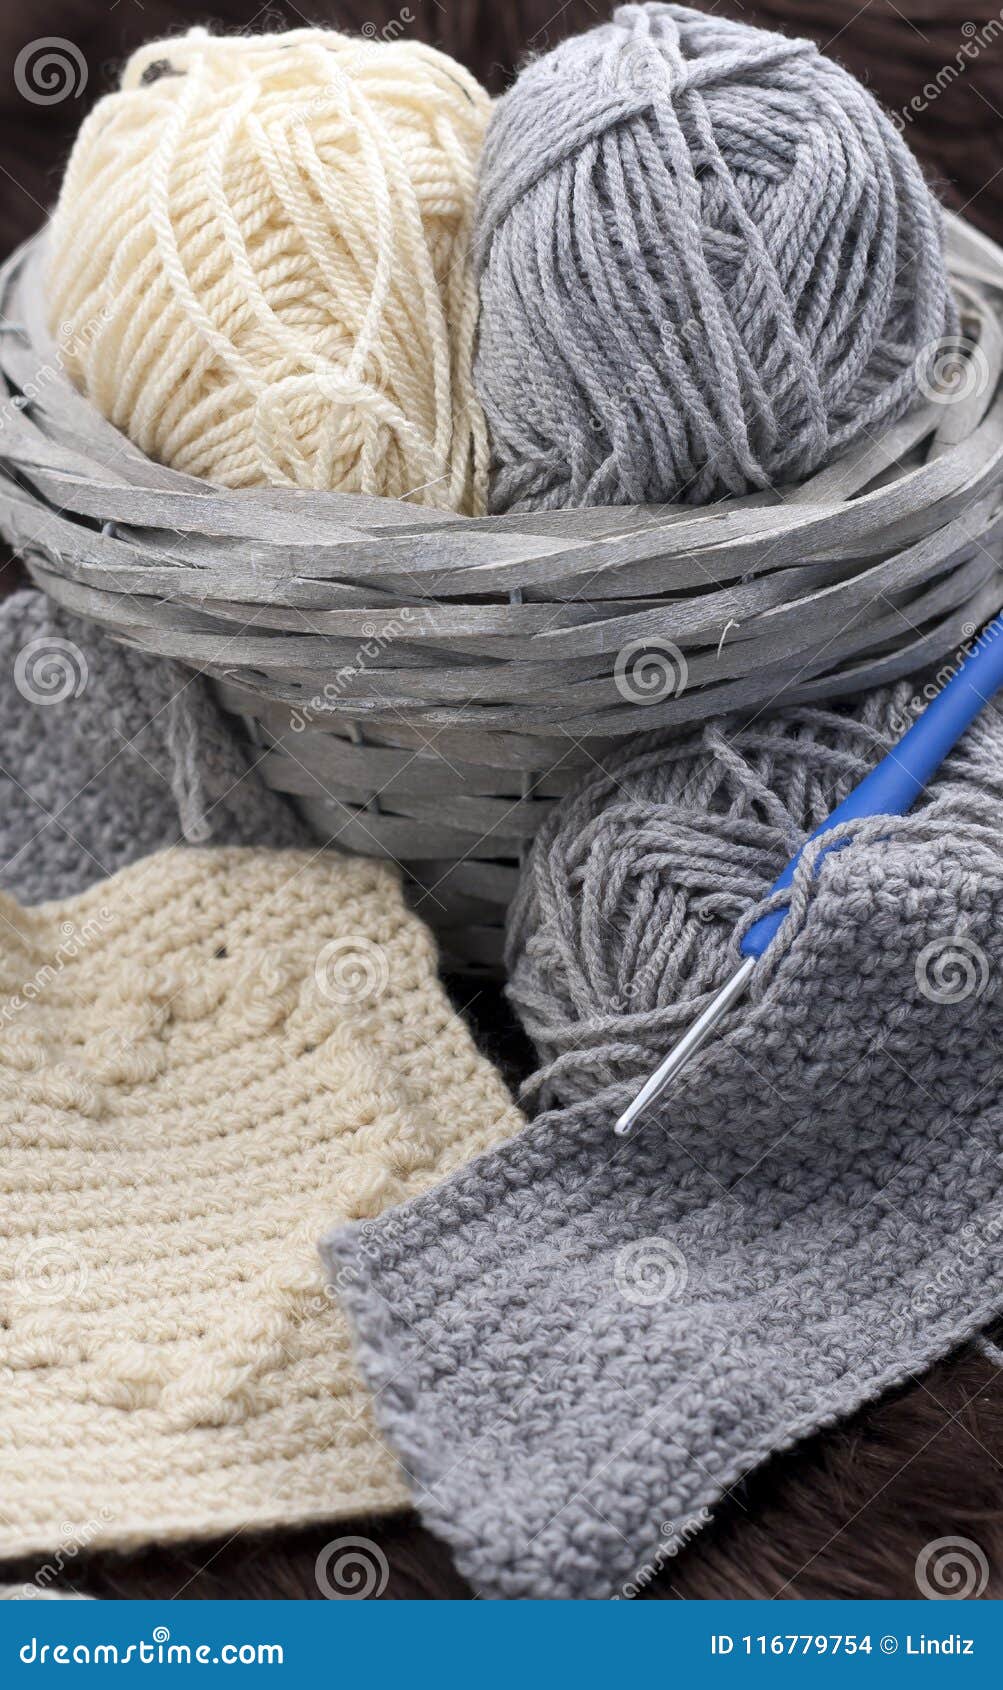 Yarns In Basket With Crochet Hooks In Harmonious Colors